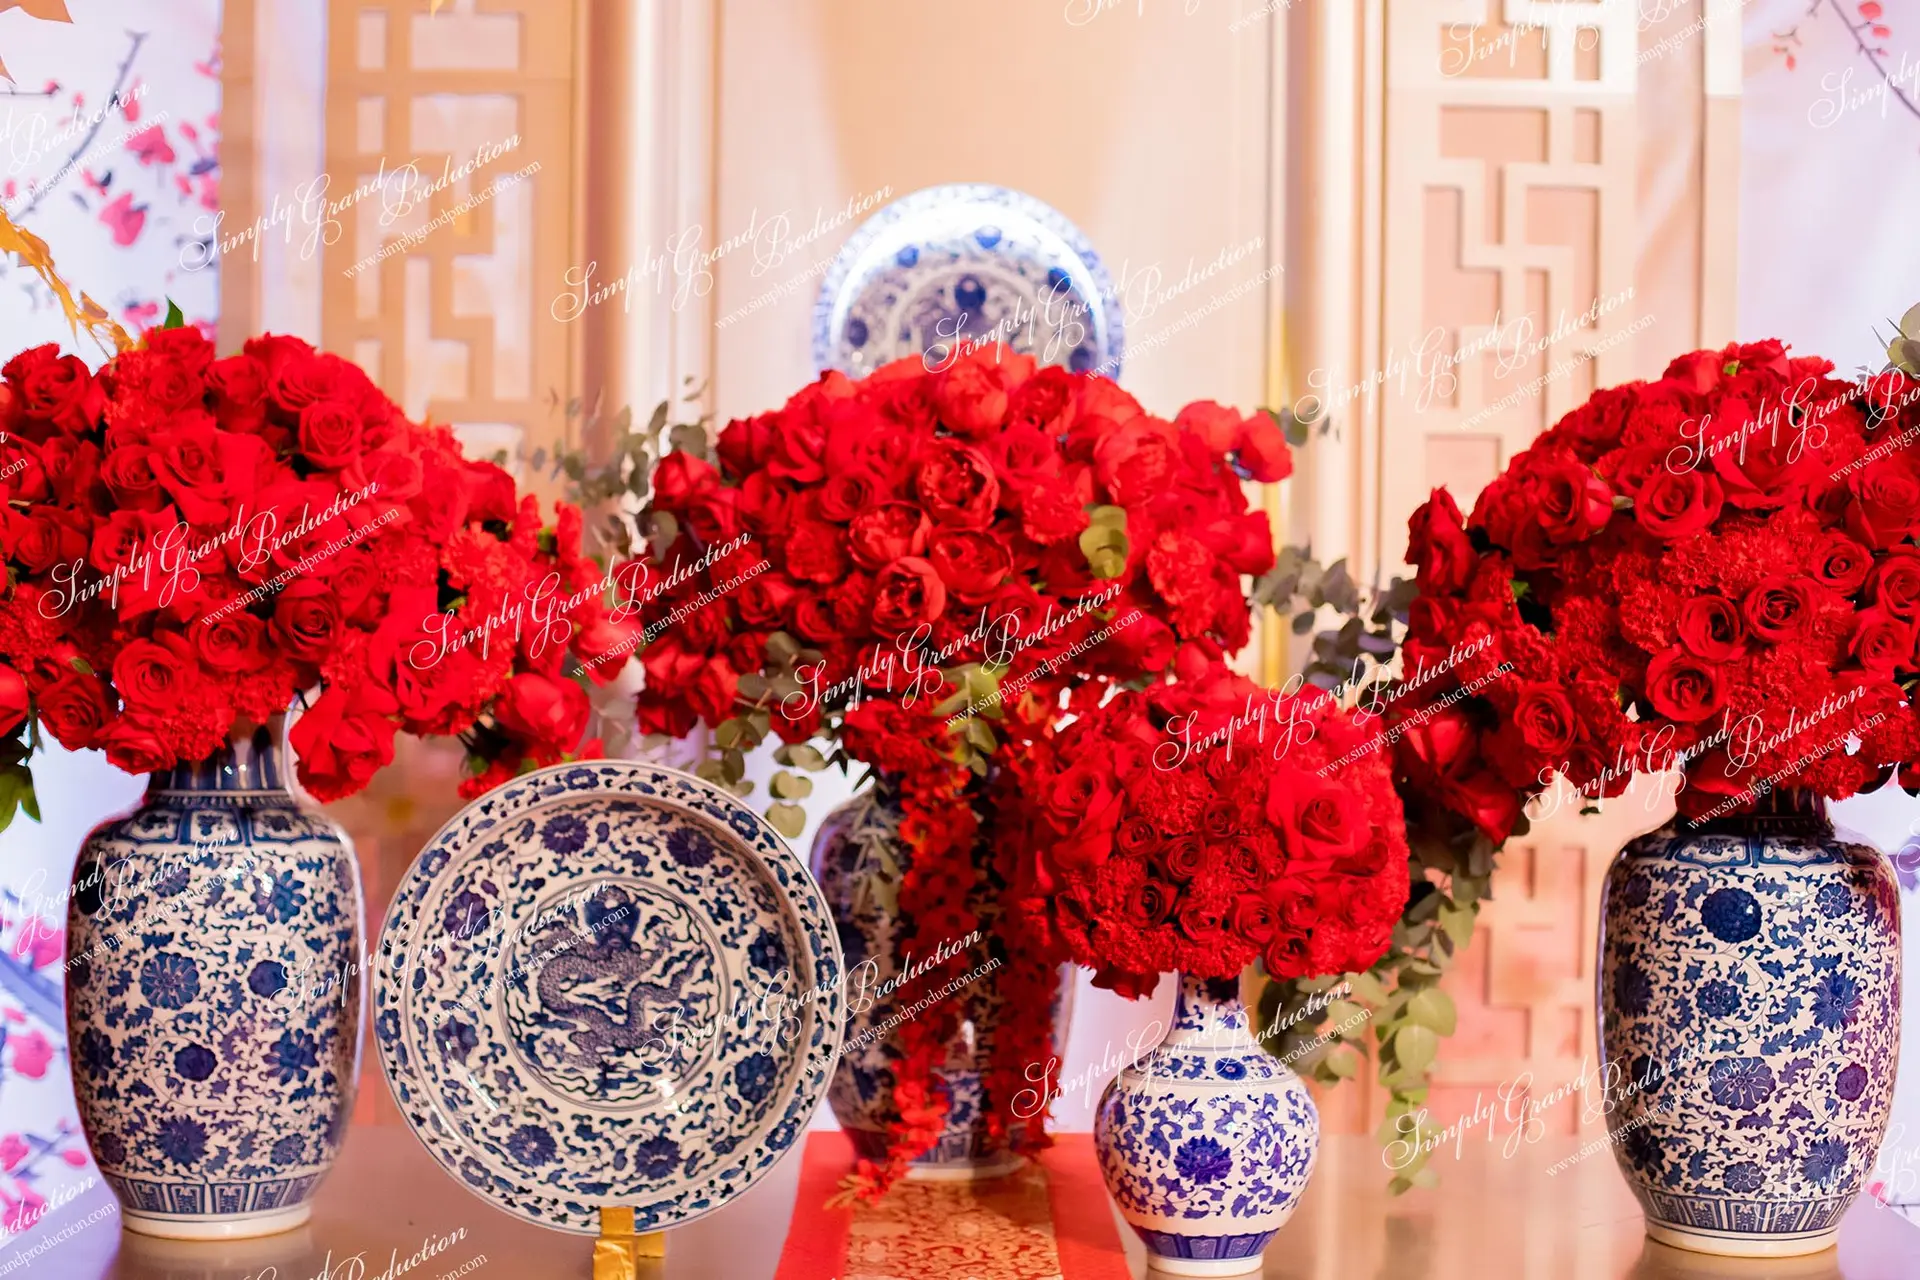 Simply_Grand_Production_wedding_decoration_blue_white_red_blooms_porcelain_vase_Chinese_Foshan_1_9